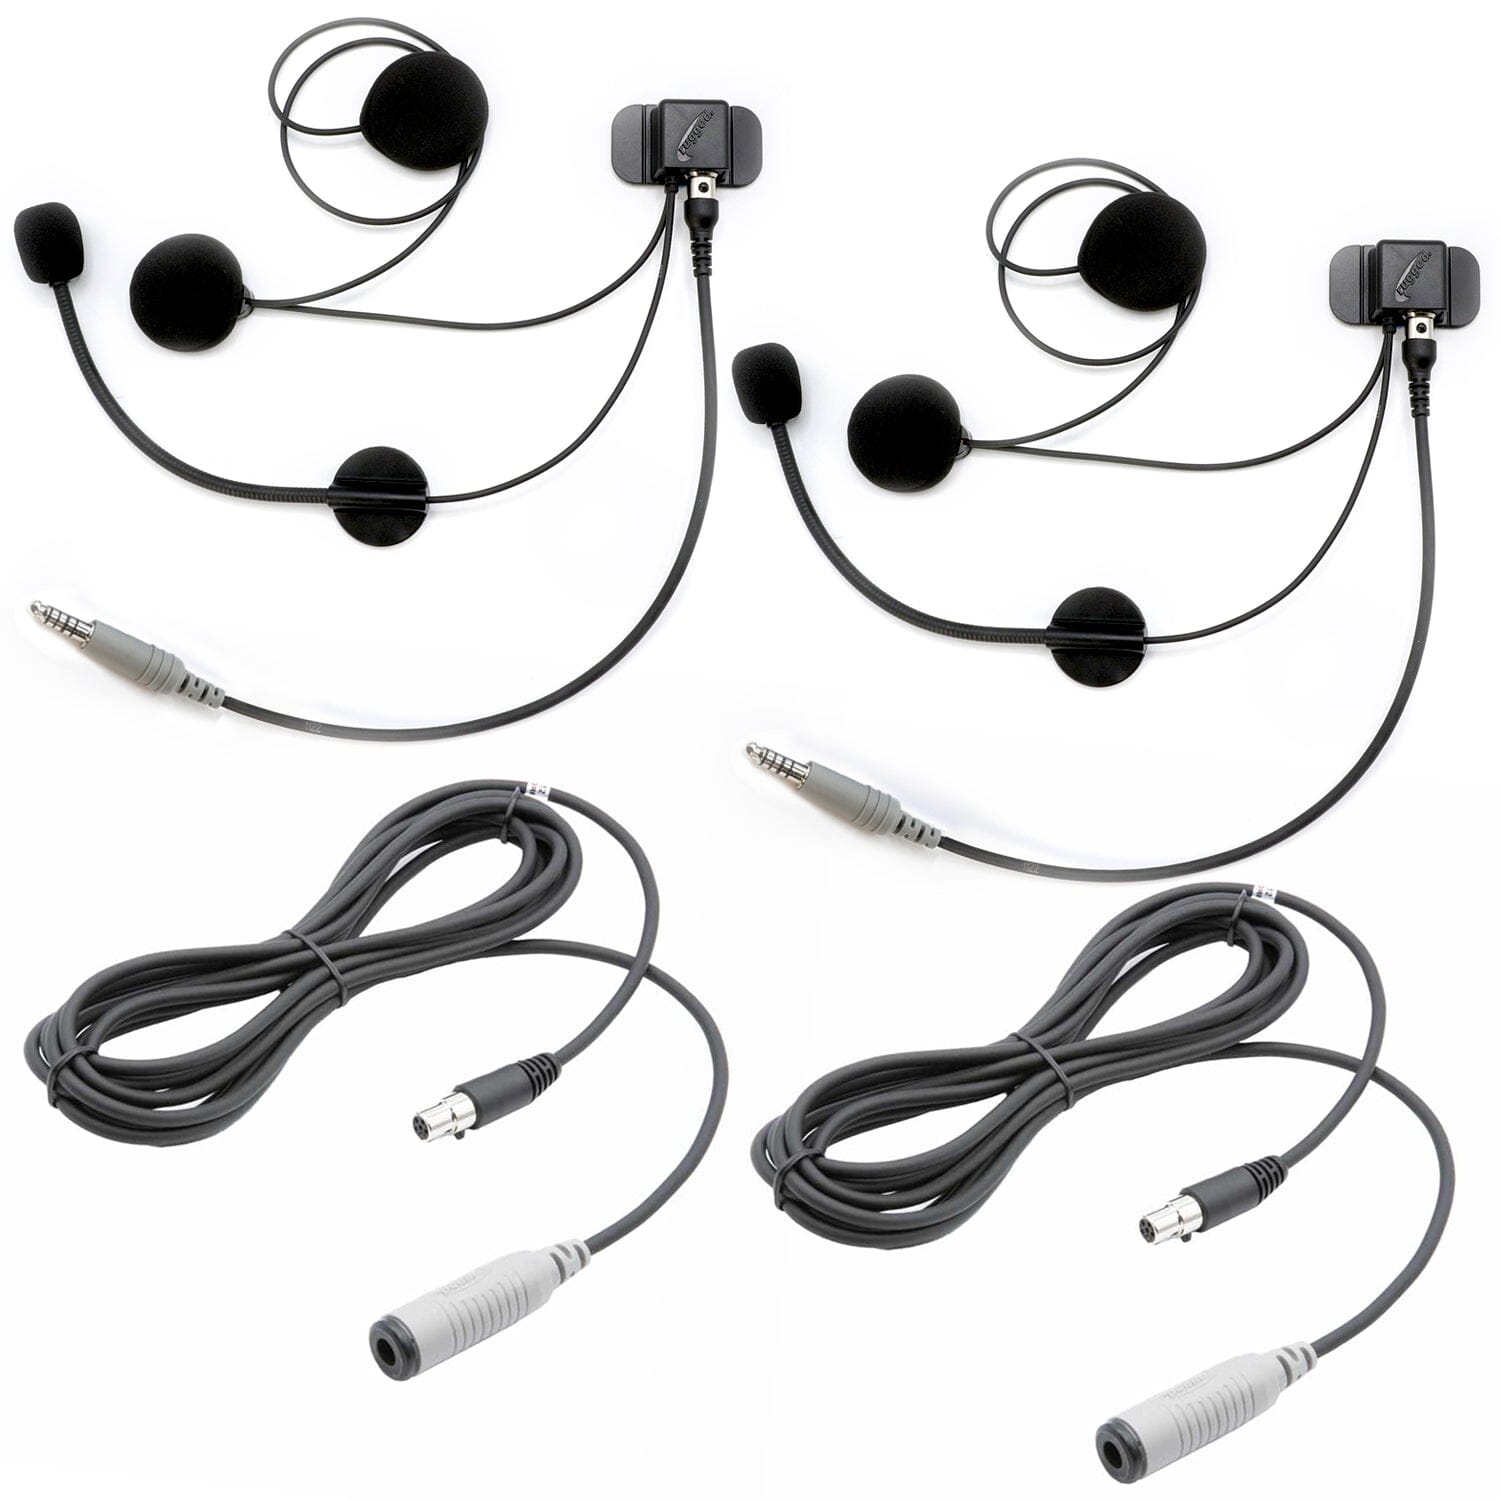 Expand to 4 Place with STX STEREO Alpha Audio Helmet Kits